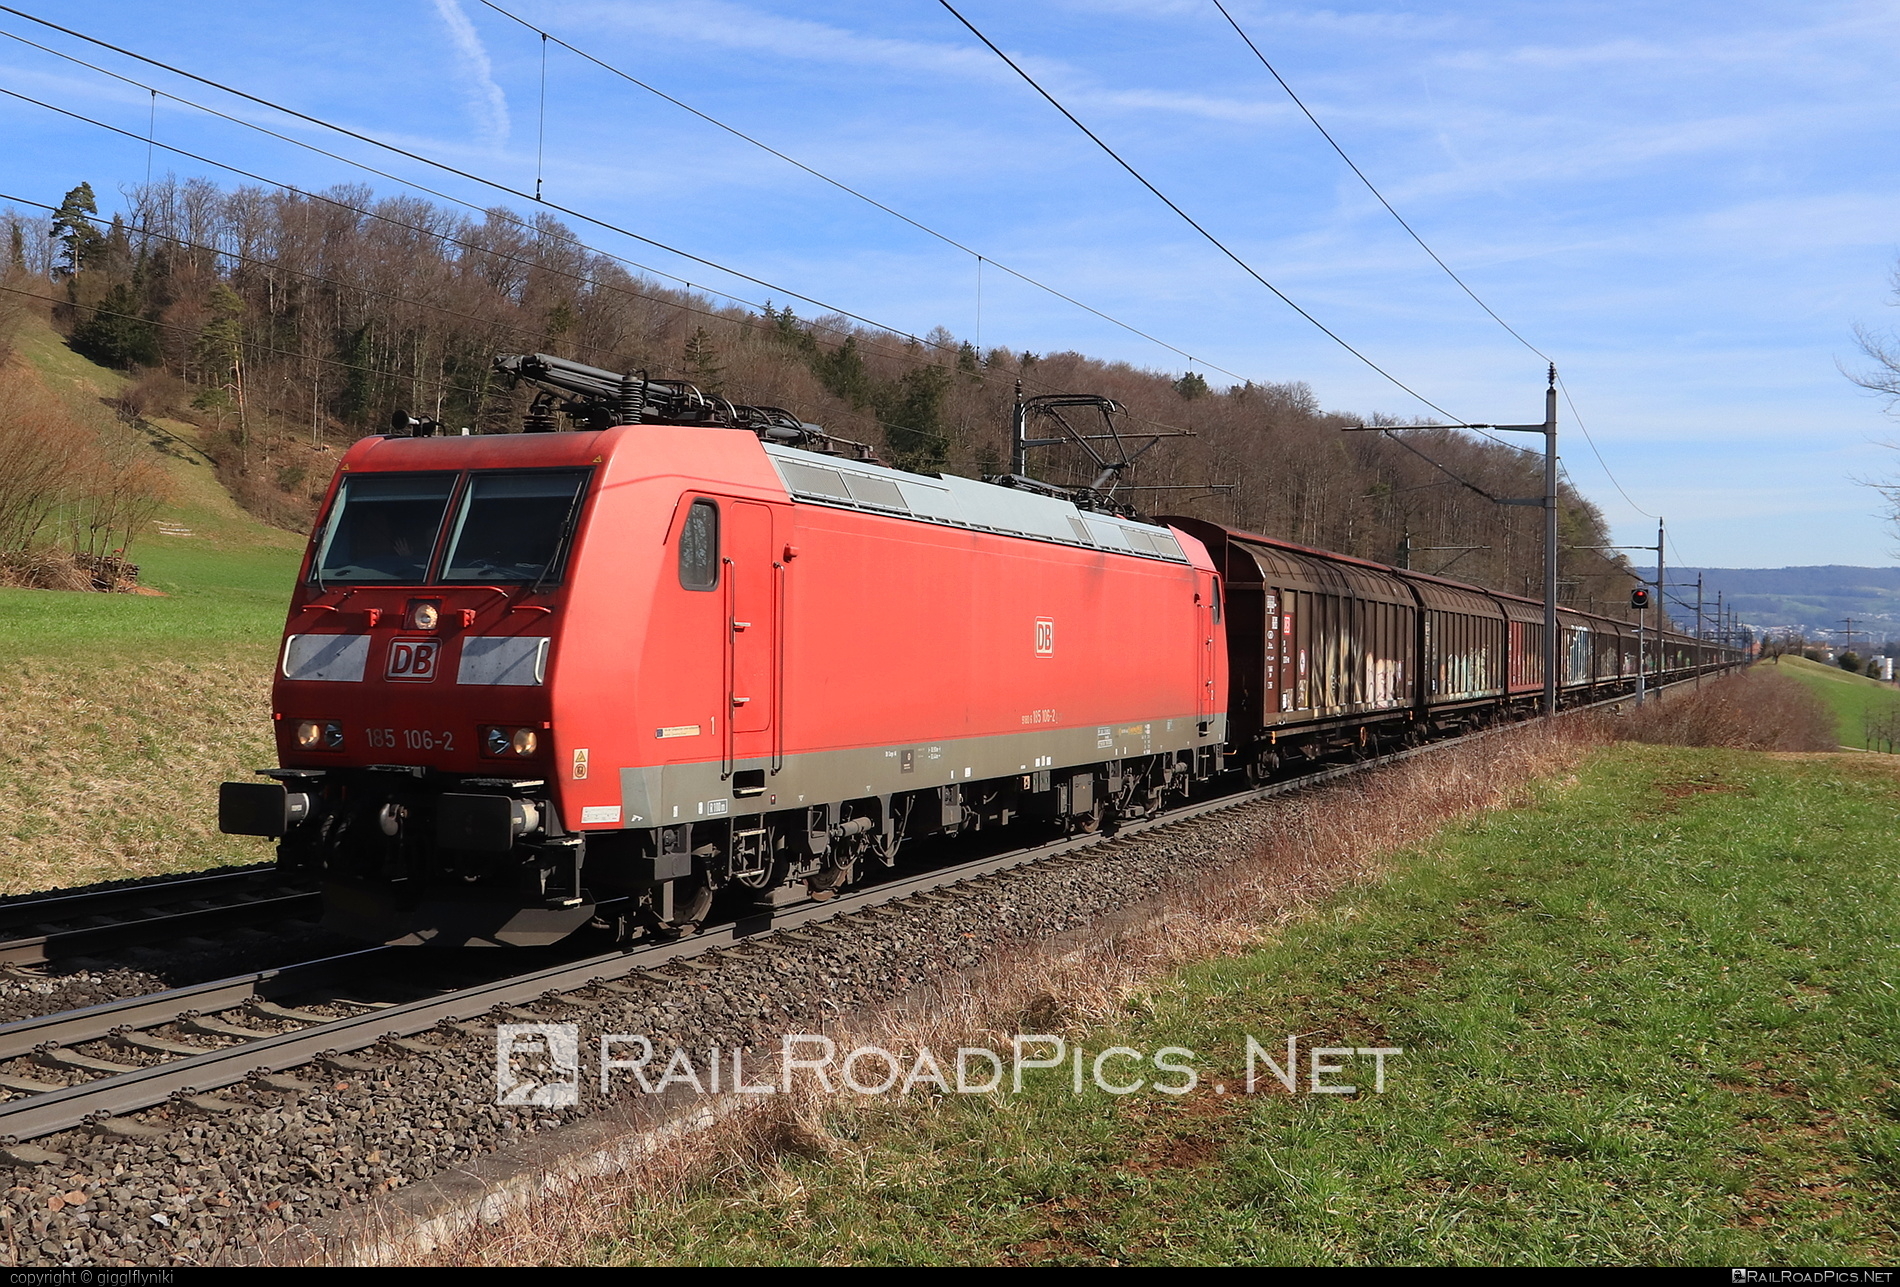 Bombardier TRAXX F140 AC1 - 185 106-2 operated by DB Cargo AG #bombardier #bombardiertraxx #db #dbcargo #dbcargoag #deutschebahn #traxx #traxxf140 #traxxf140ac #traxxf140ac1